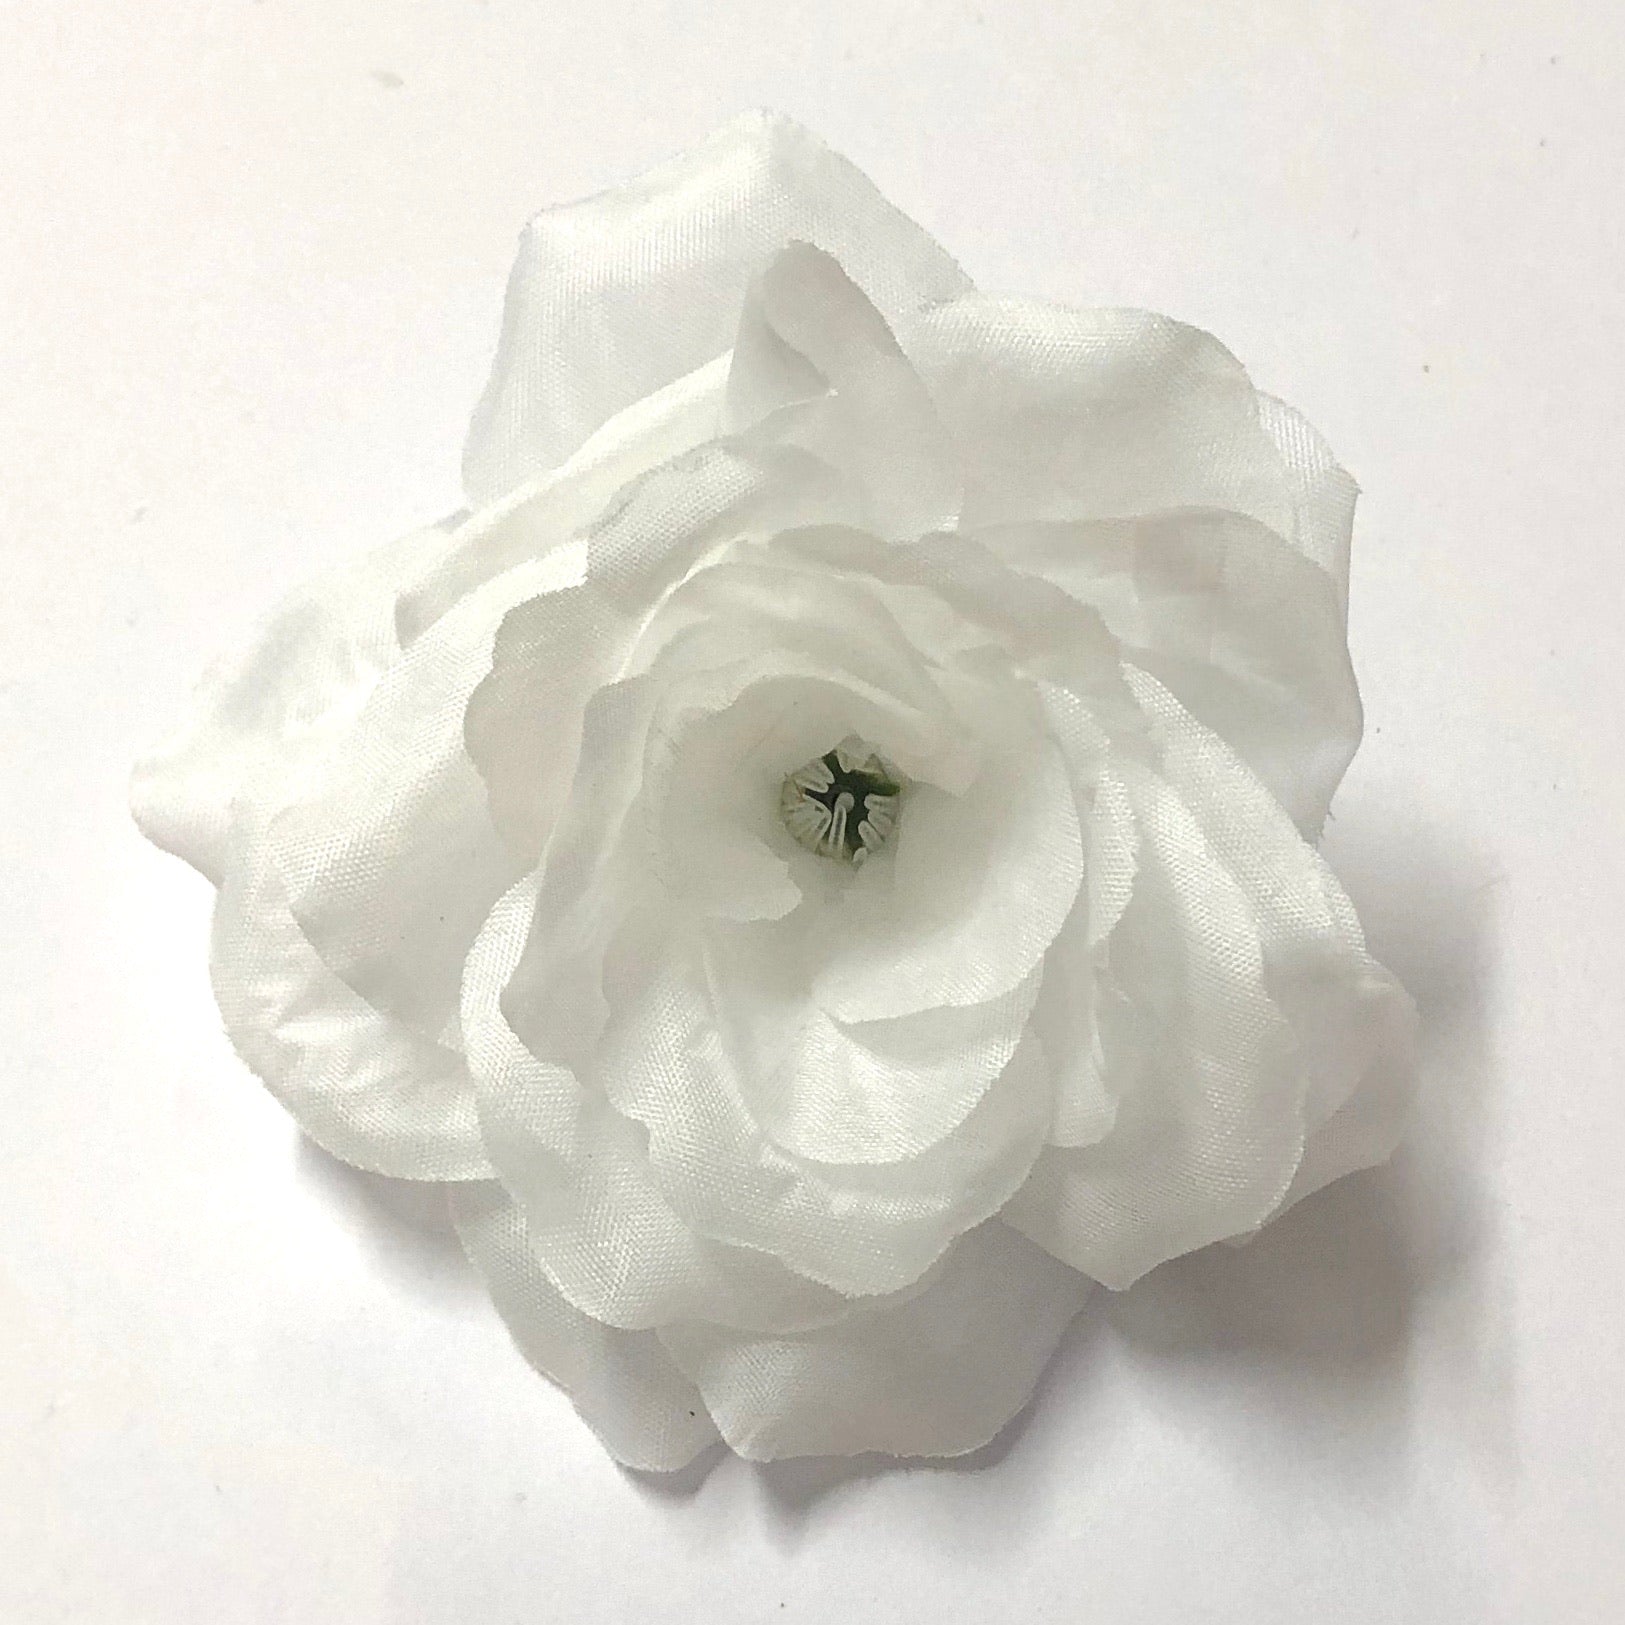 Artificial Silk Flower Head - White Rose Style 115 - 1pc